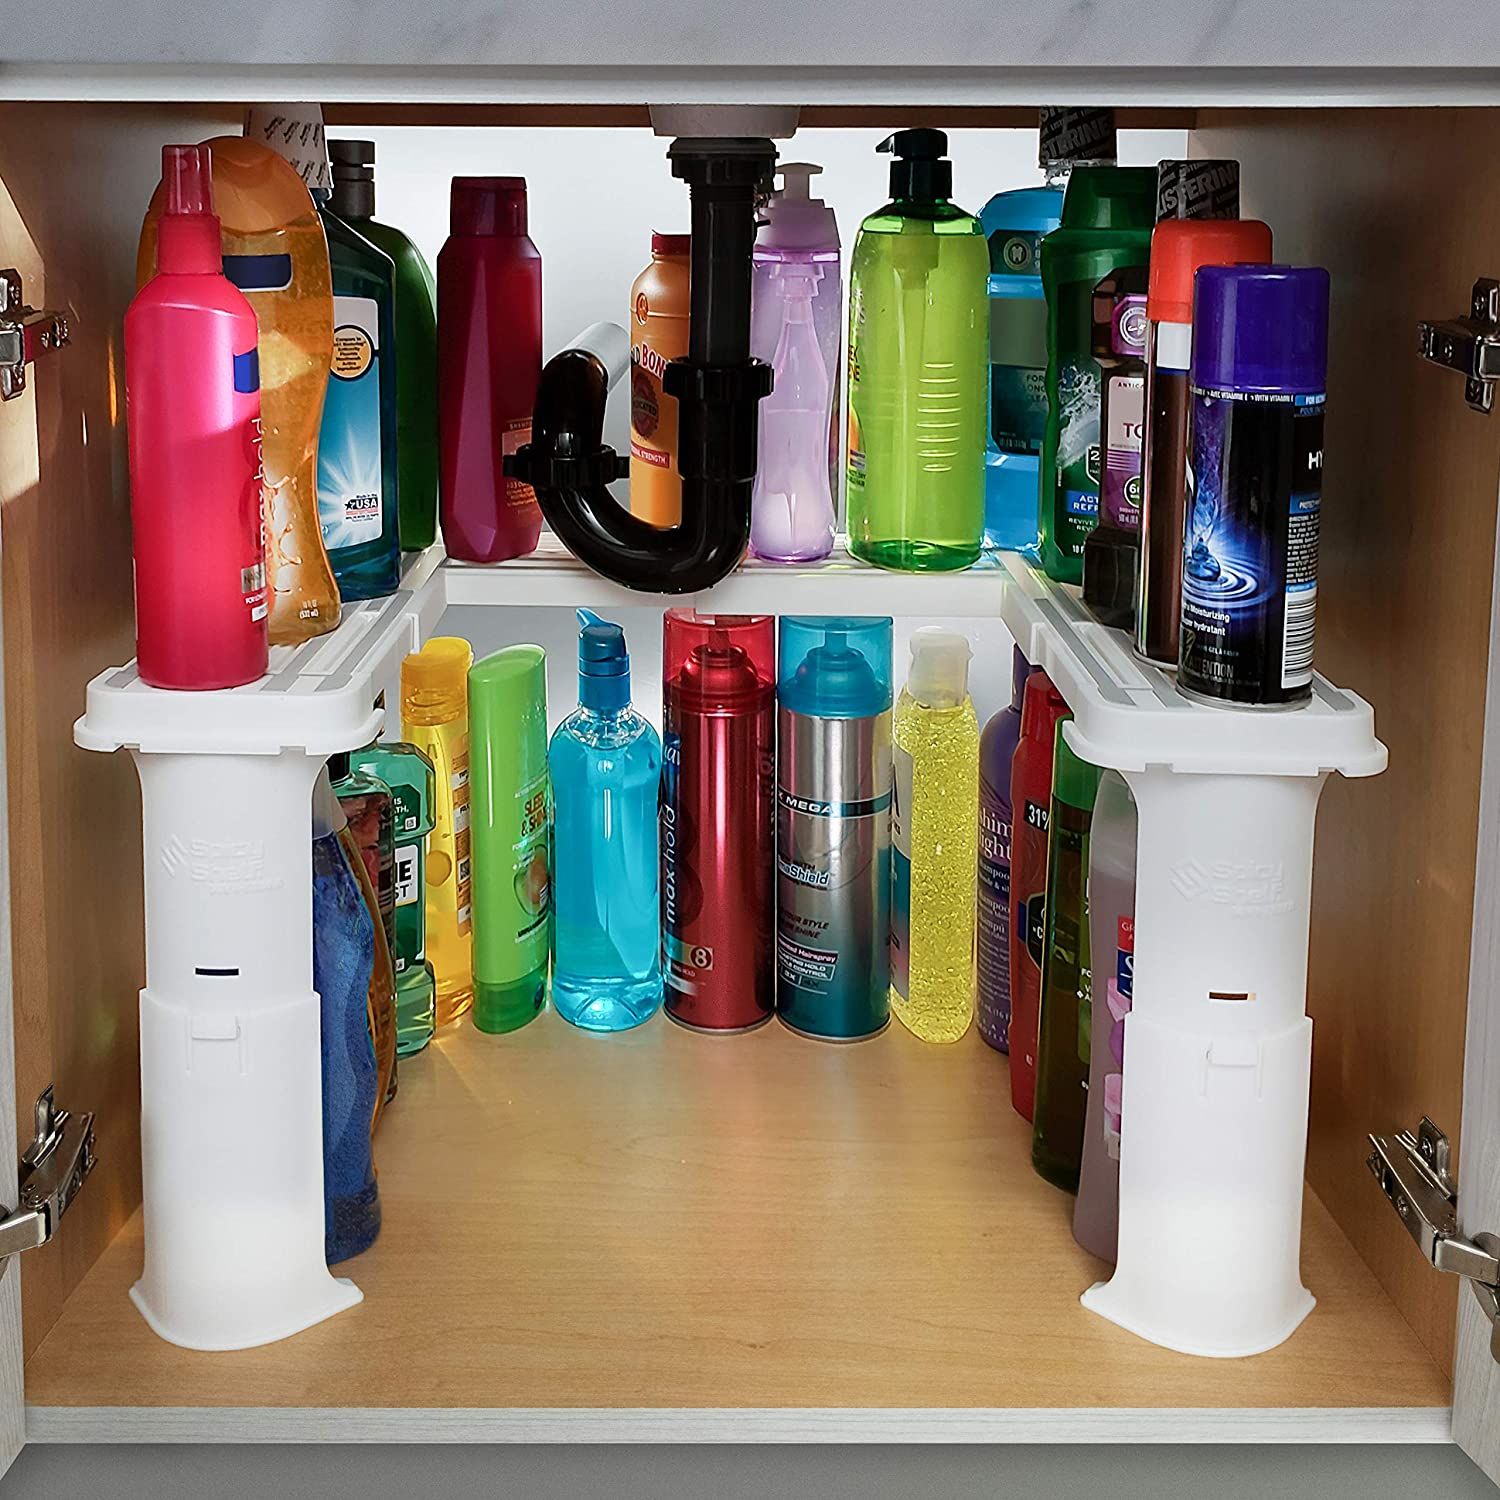 This Viral TikTok Shelf Organizes Your Under-Sink Space—And It's on Sale